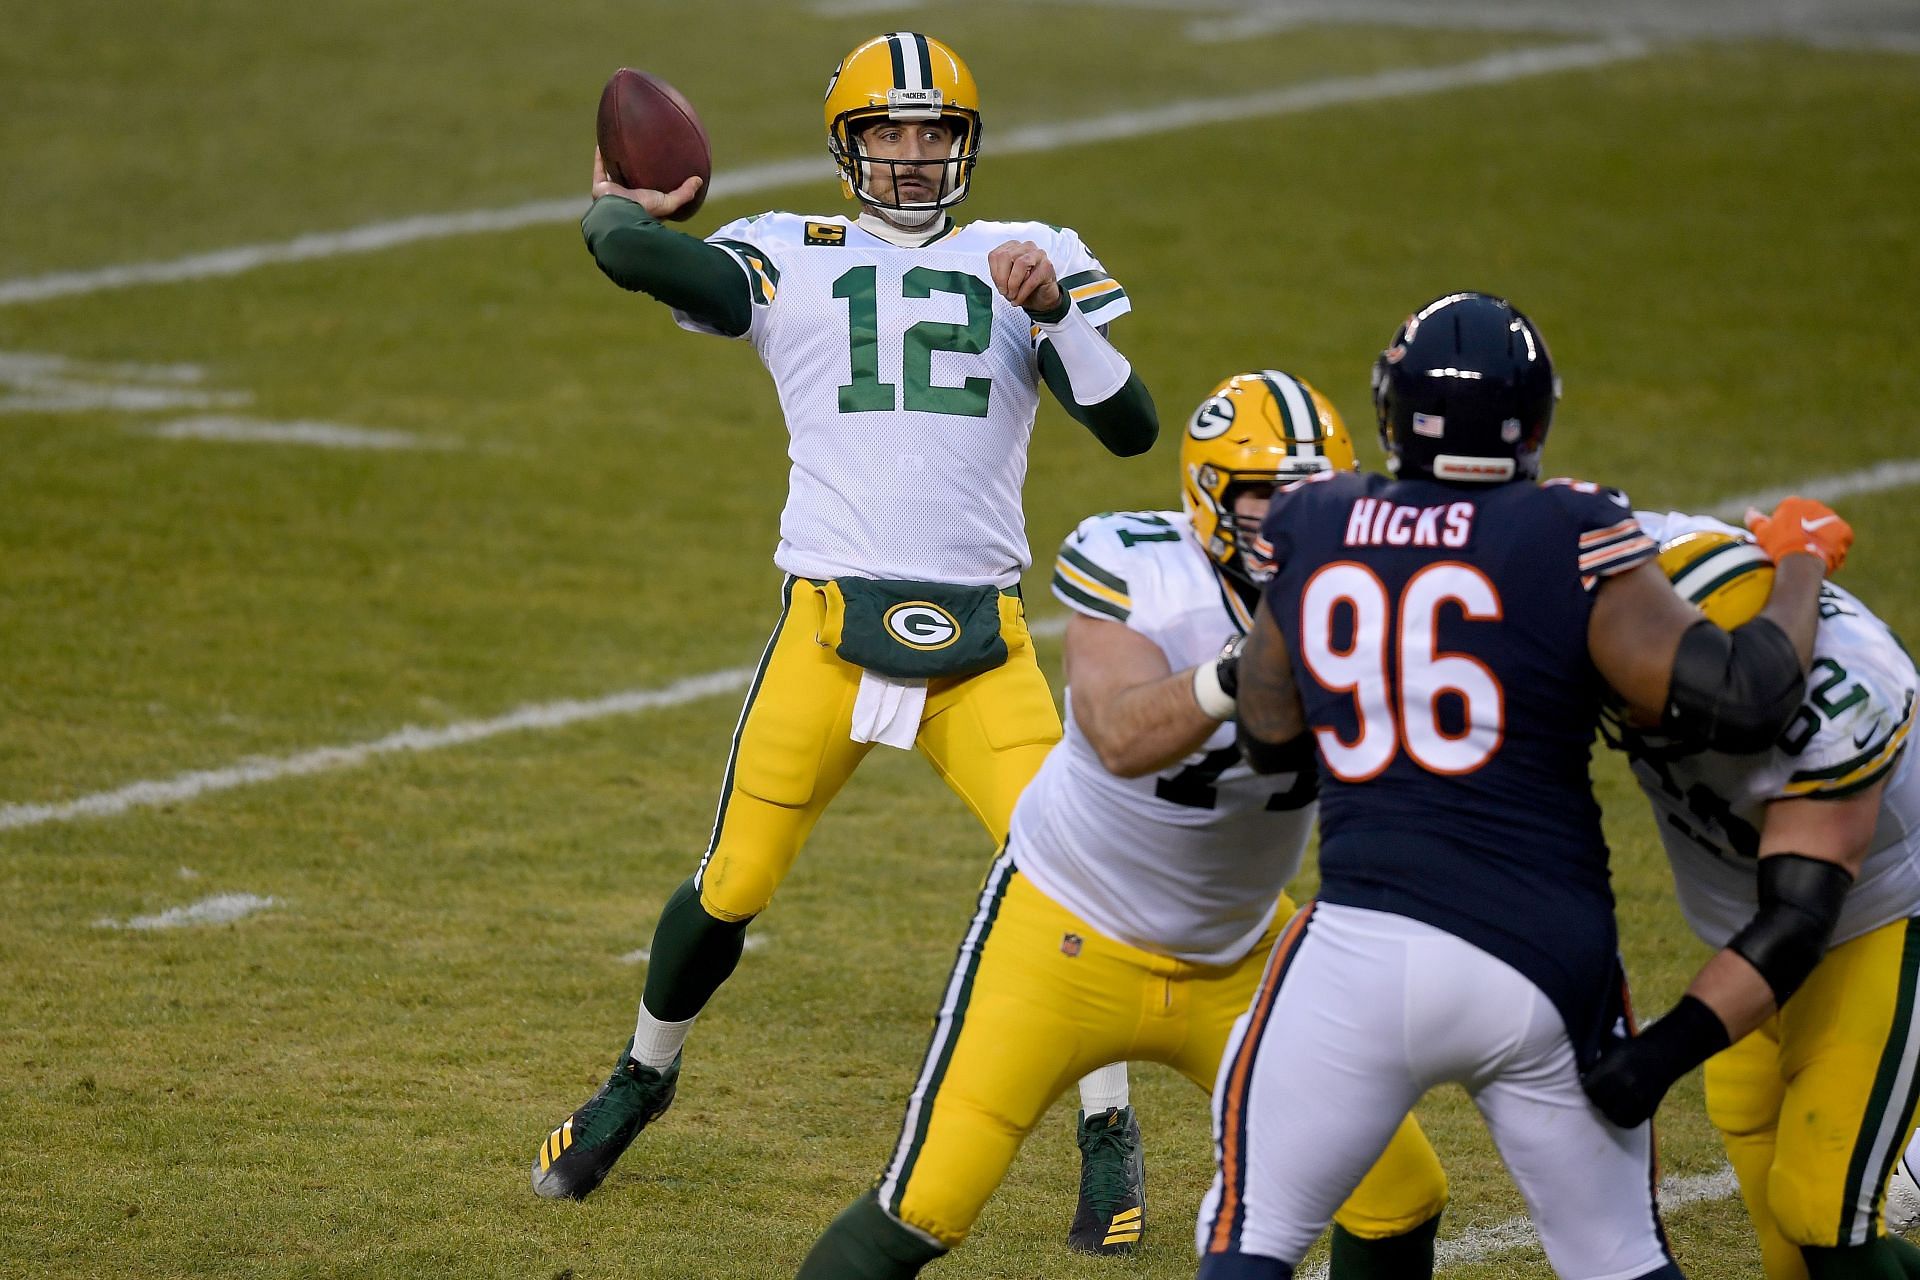 Green Bay Packers QB Aaron Rodgers playing against the Chicago Bears